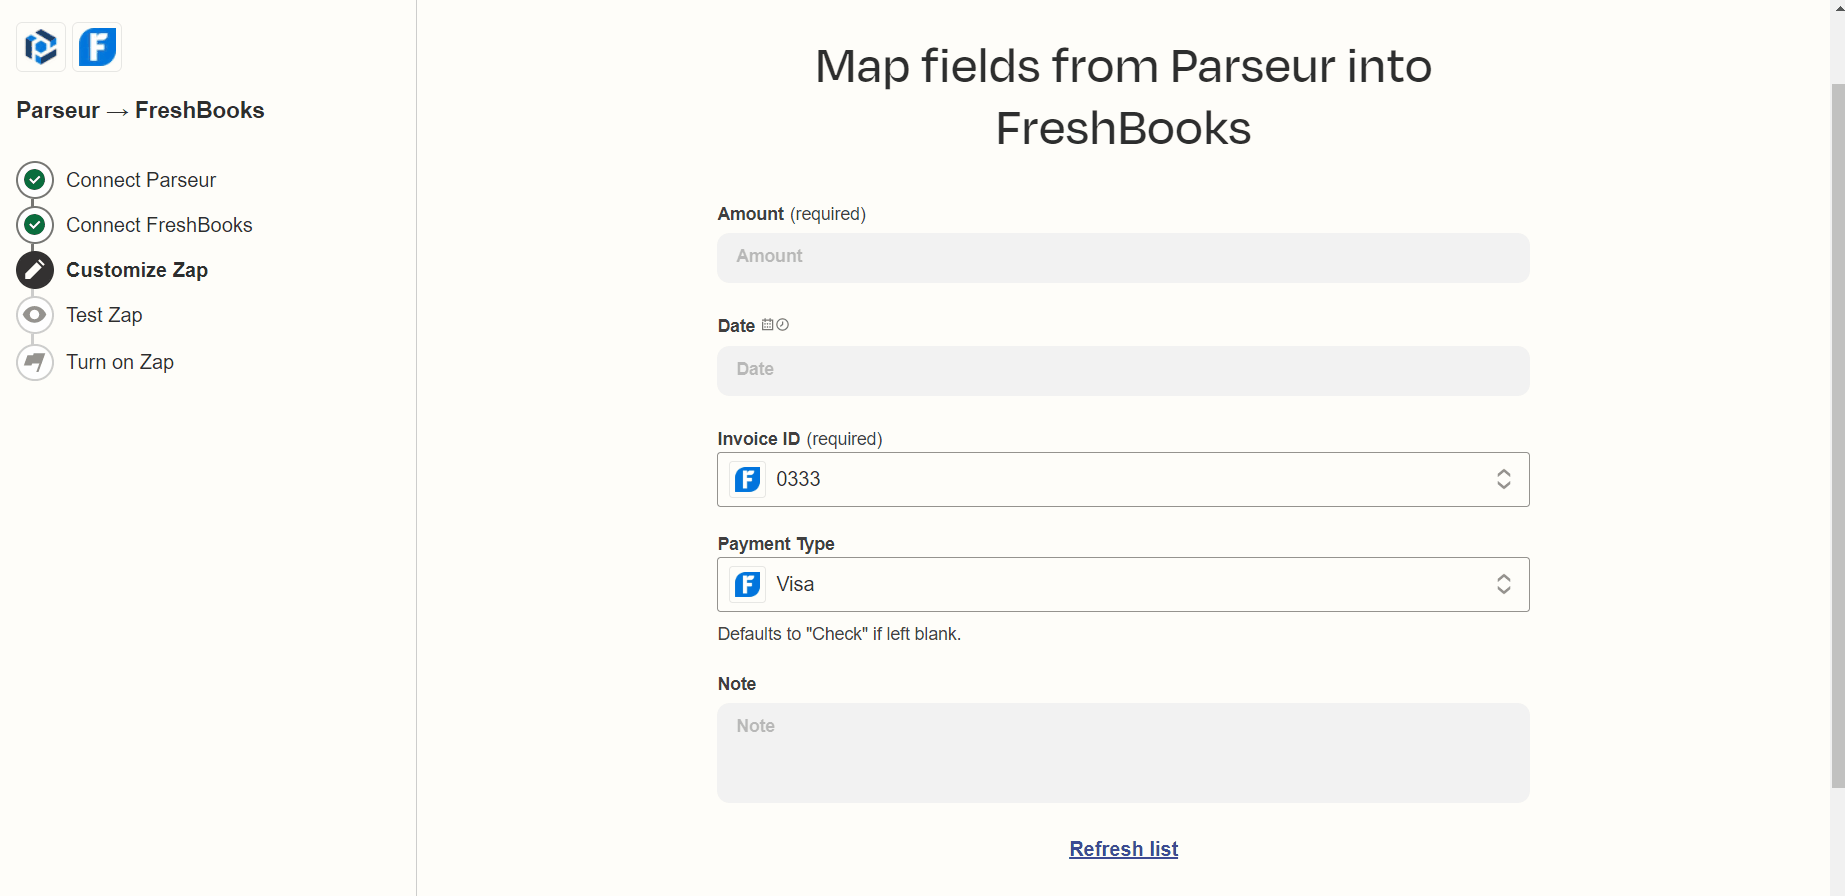 Customize the fields you want to send to FreshBooks